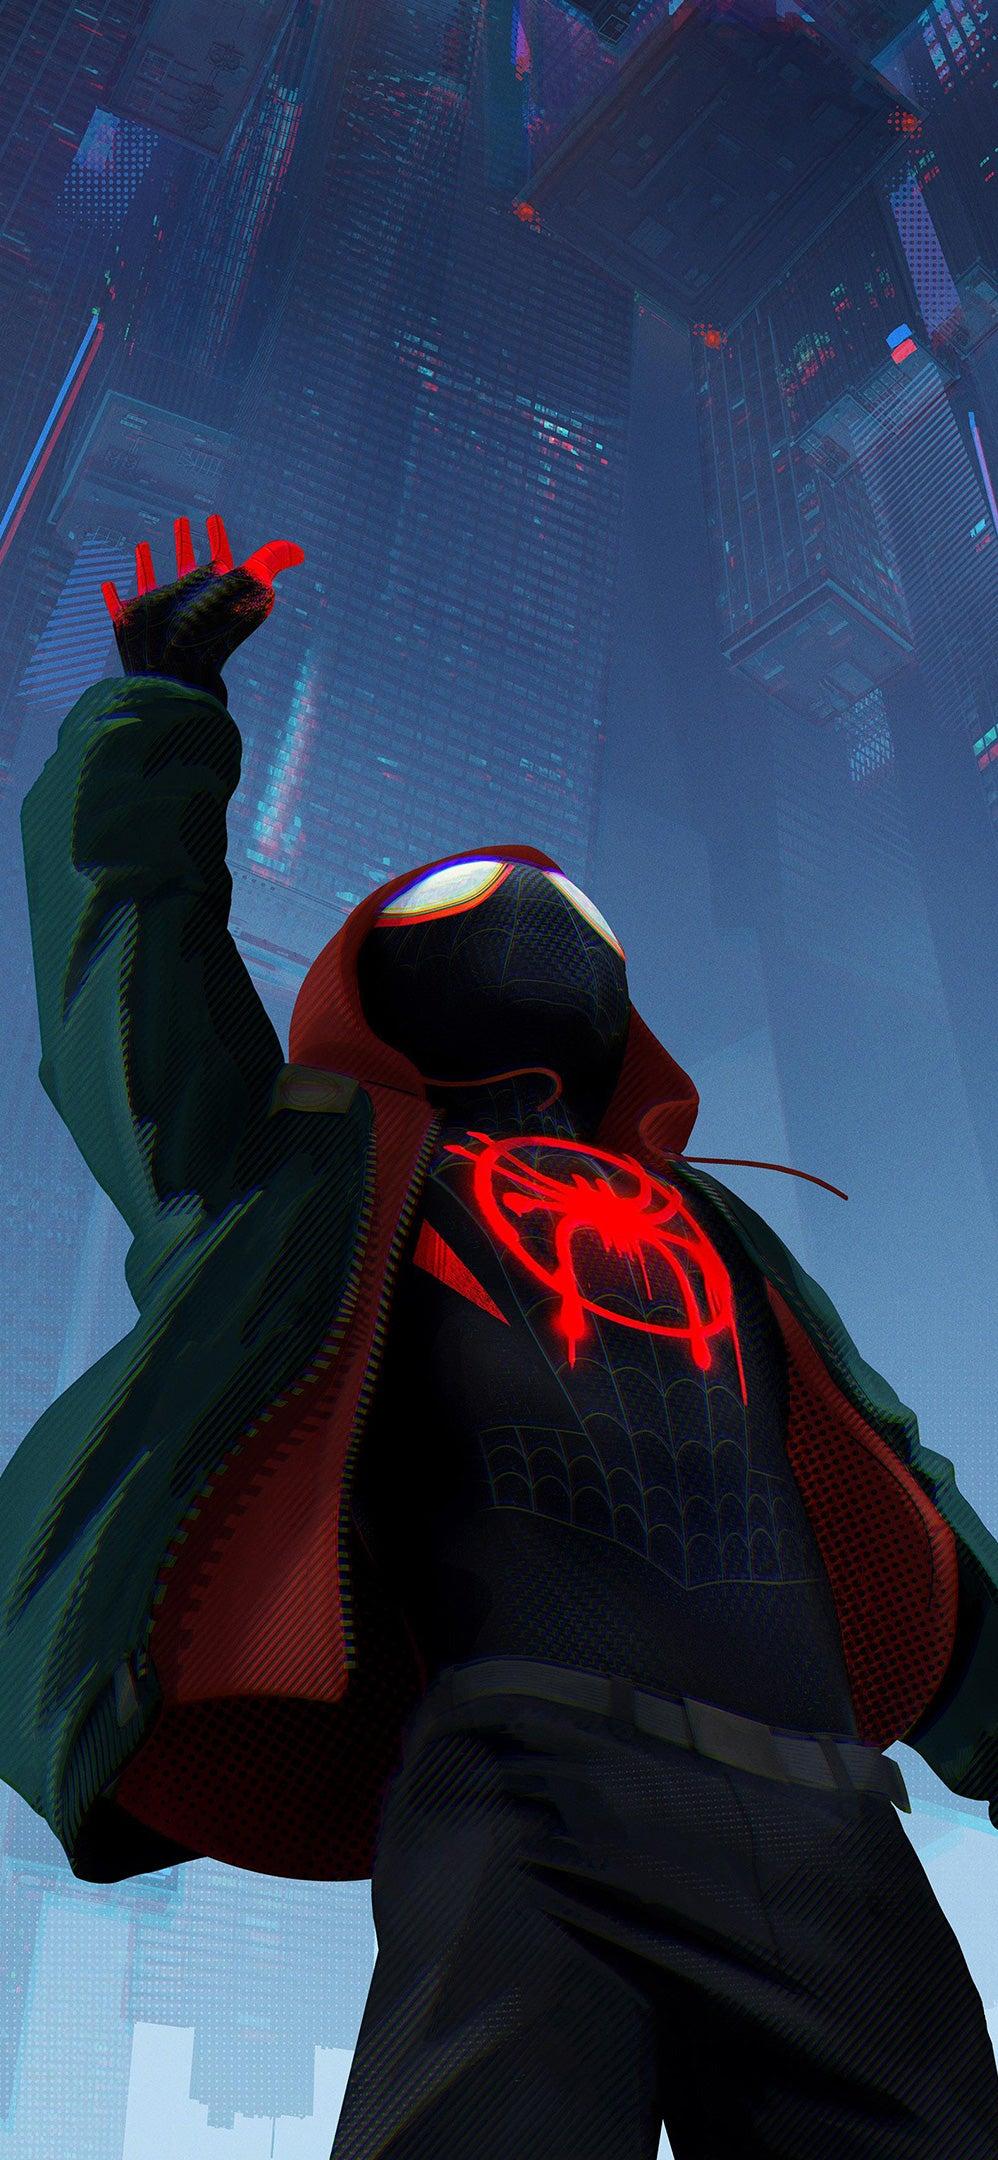 Out Of The Spider Verse. Smart Phone Wallpaper